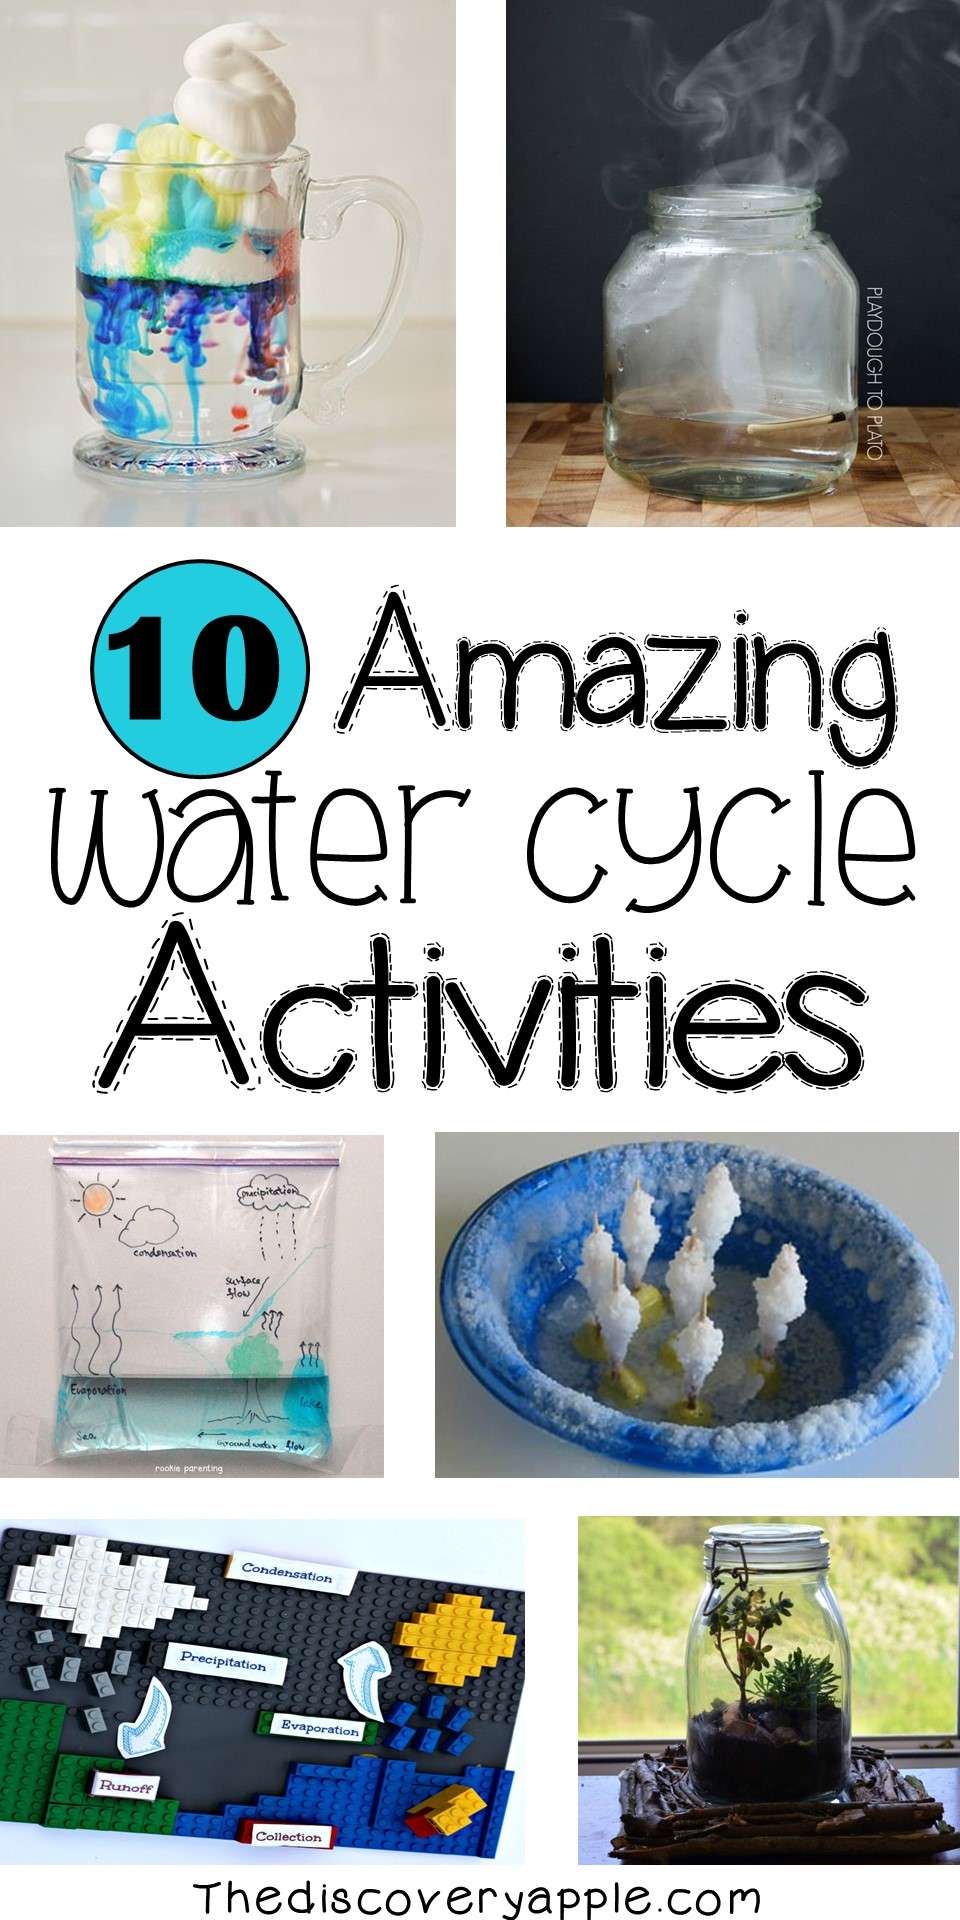 10 Amazing Water Cycle Activities and Extra Resources - The Discovery Apple